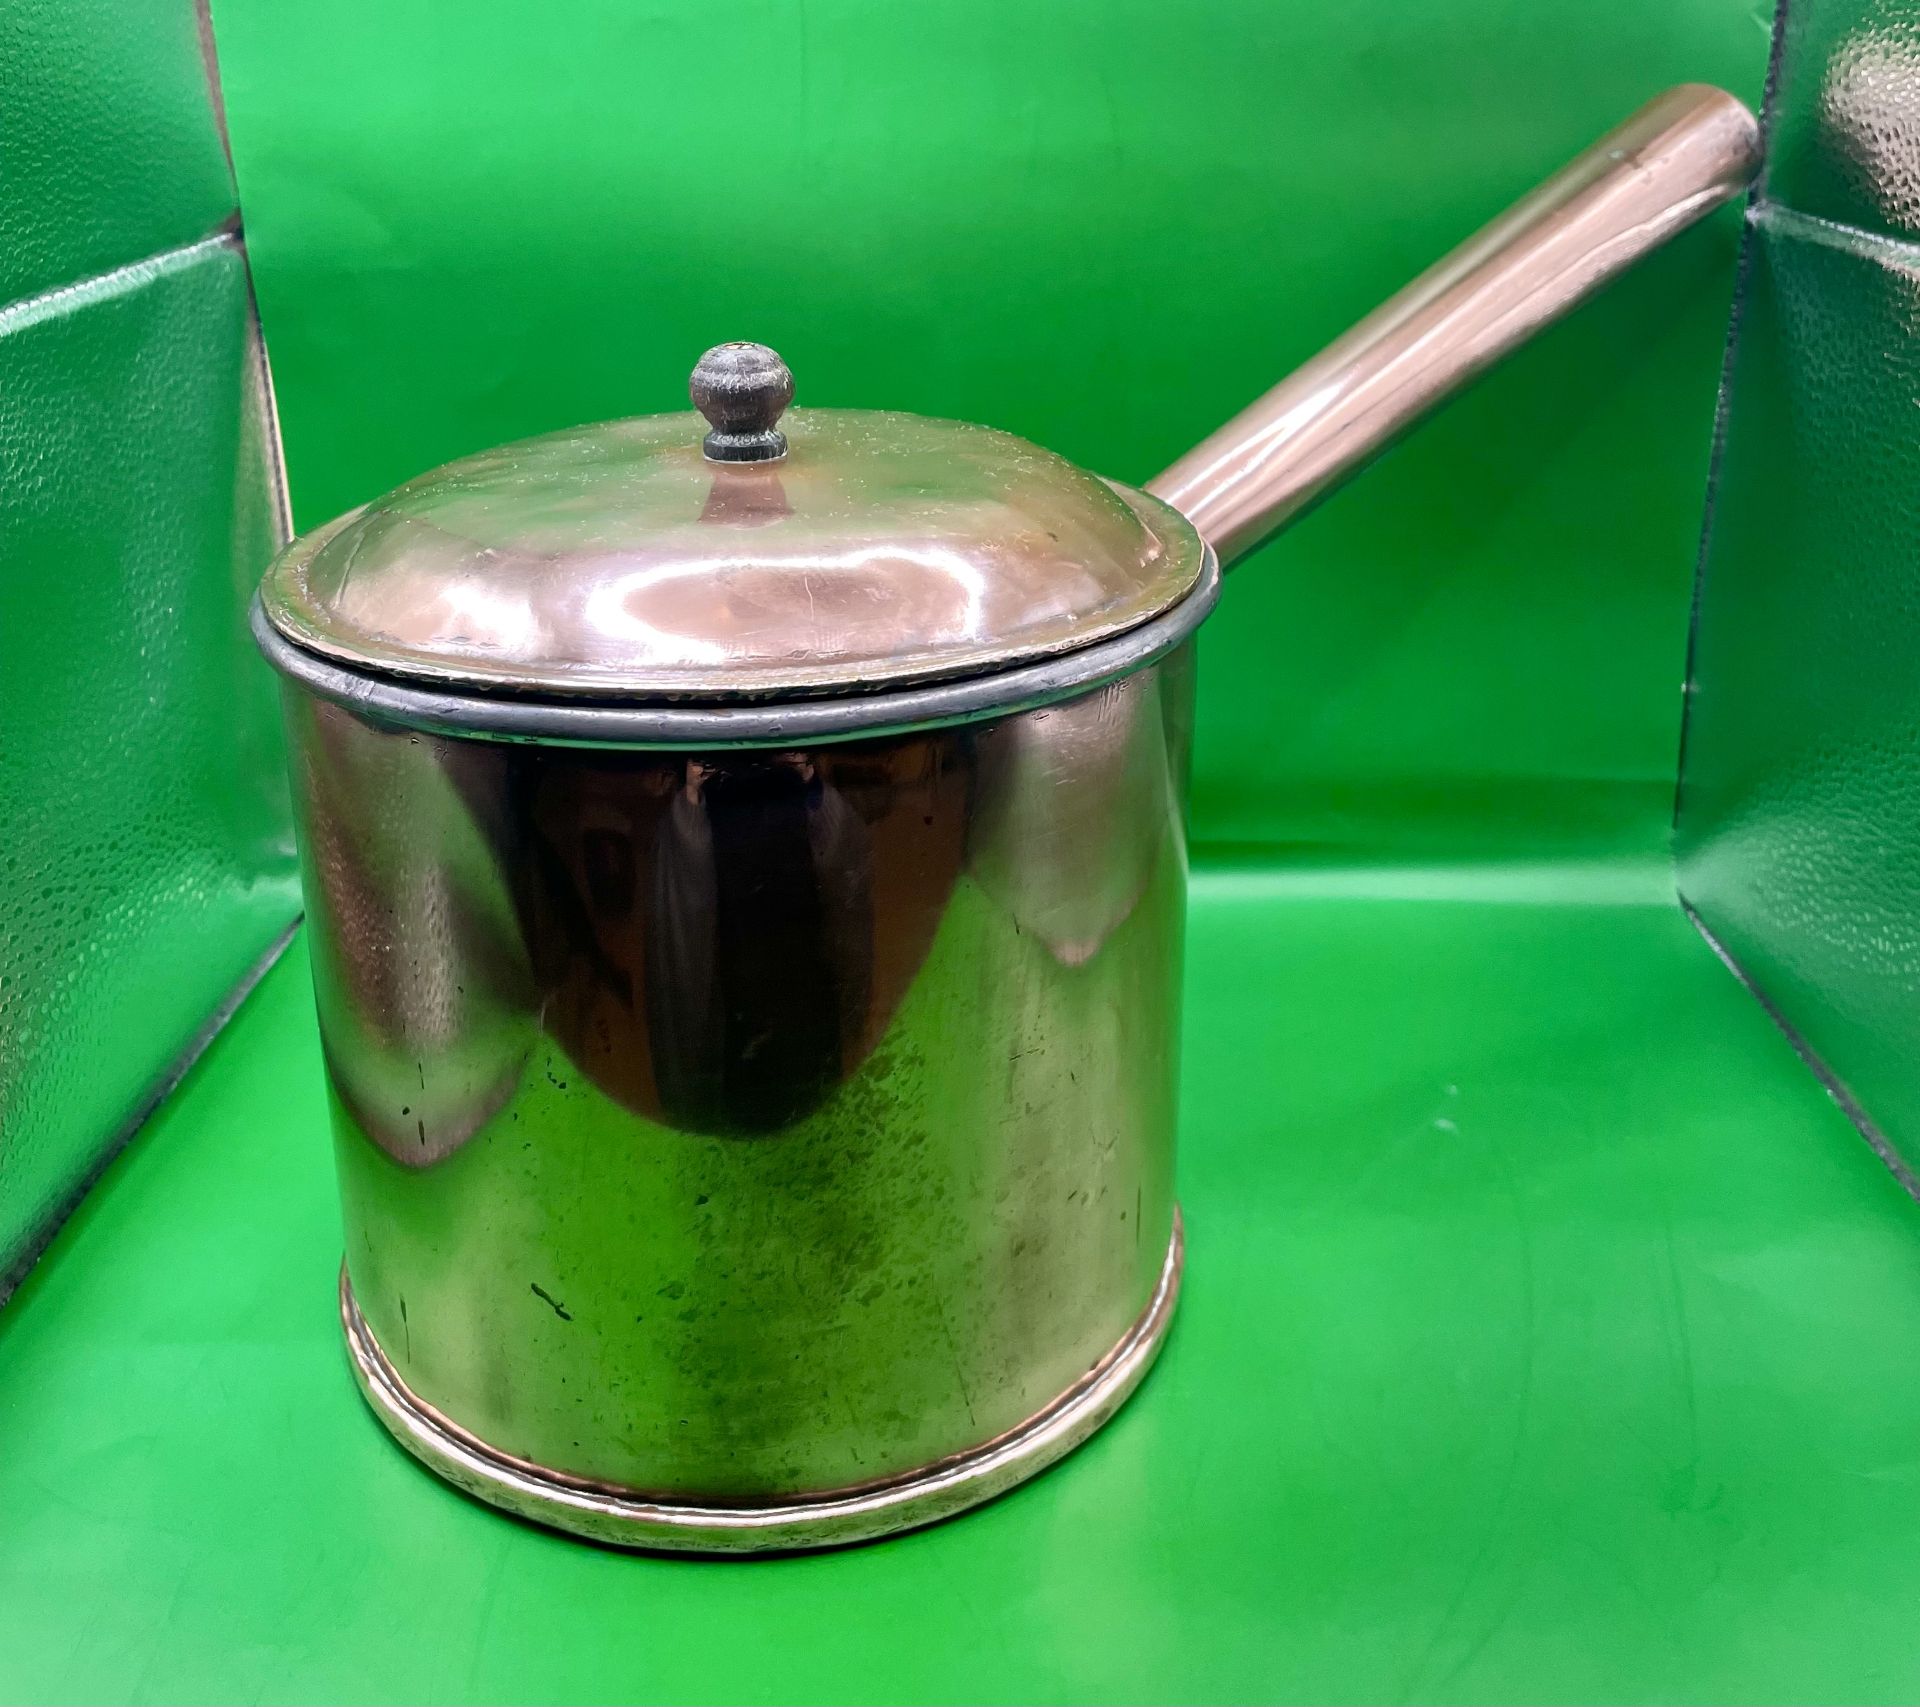 An Antique Georgian Copper Boiling pan lined on the inside with tin. Great condition stunning item.